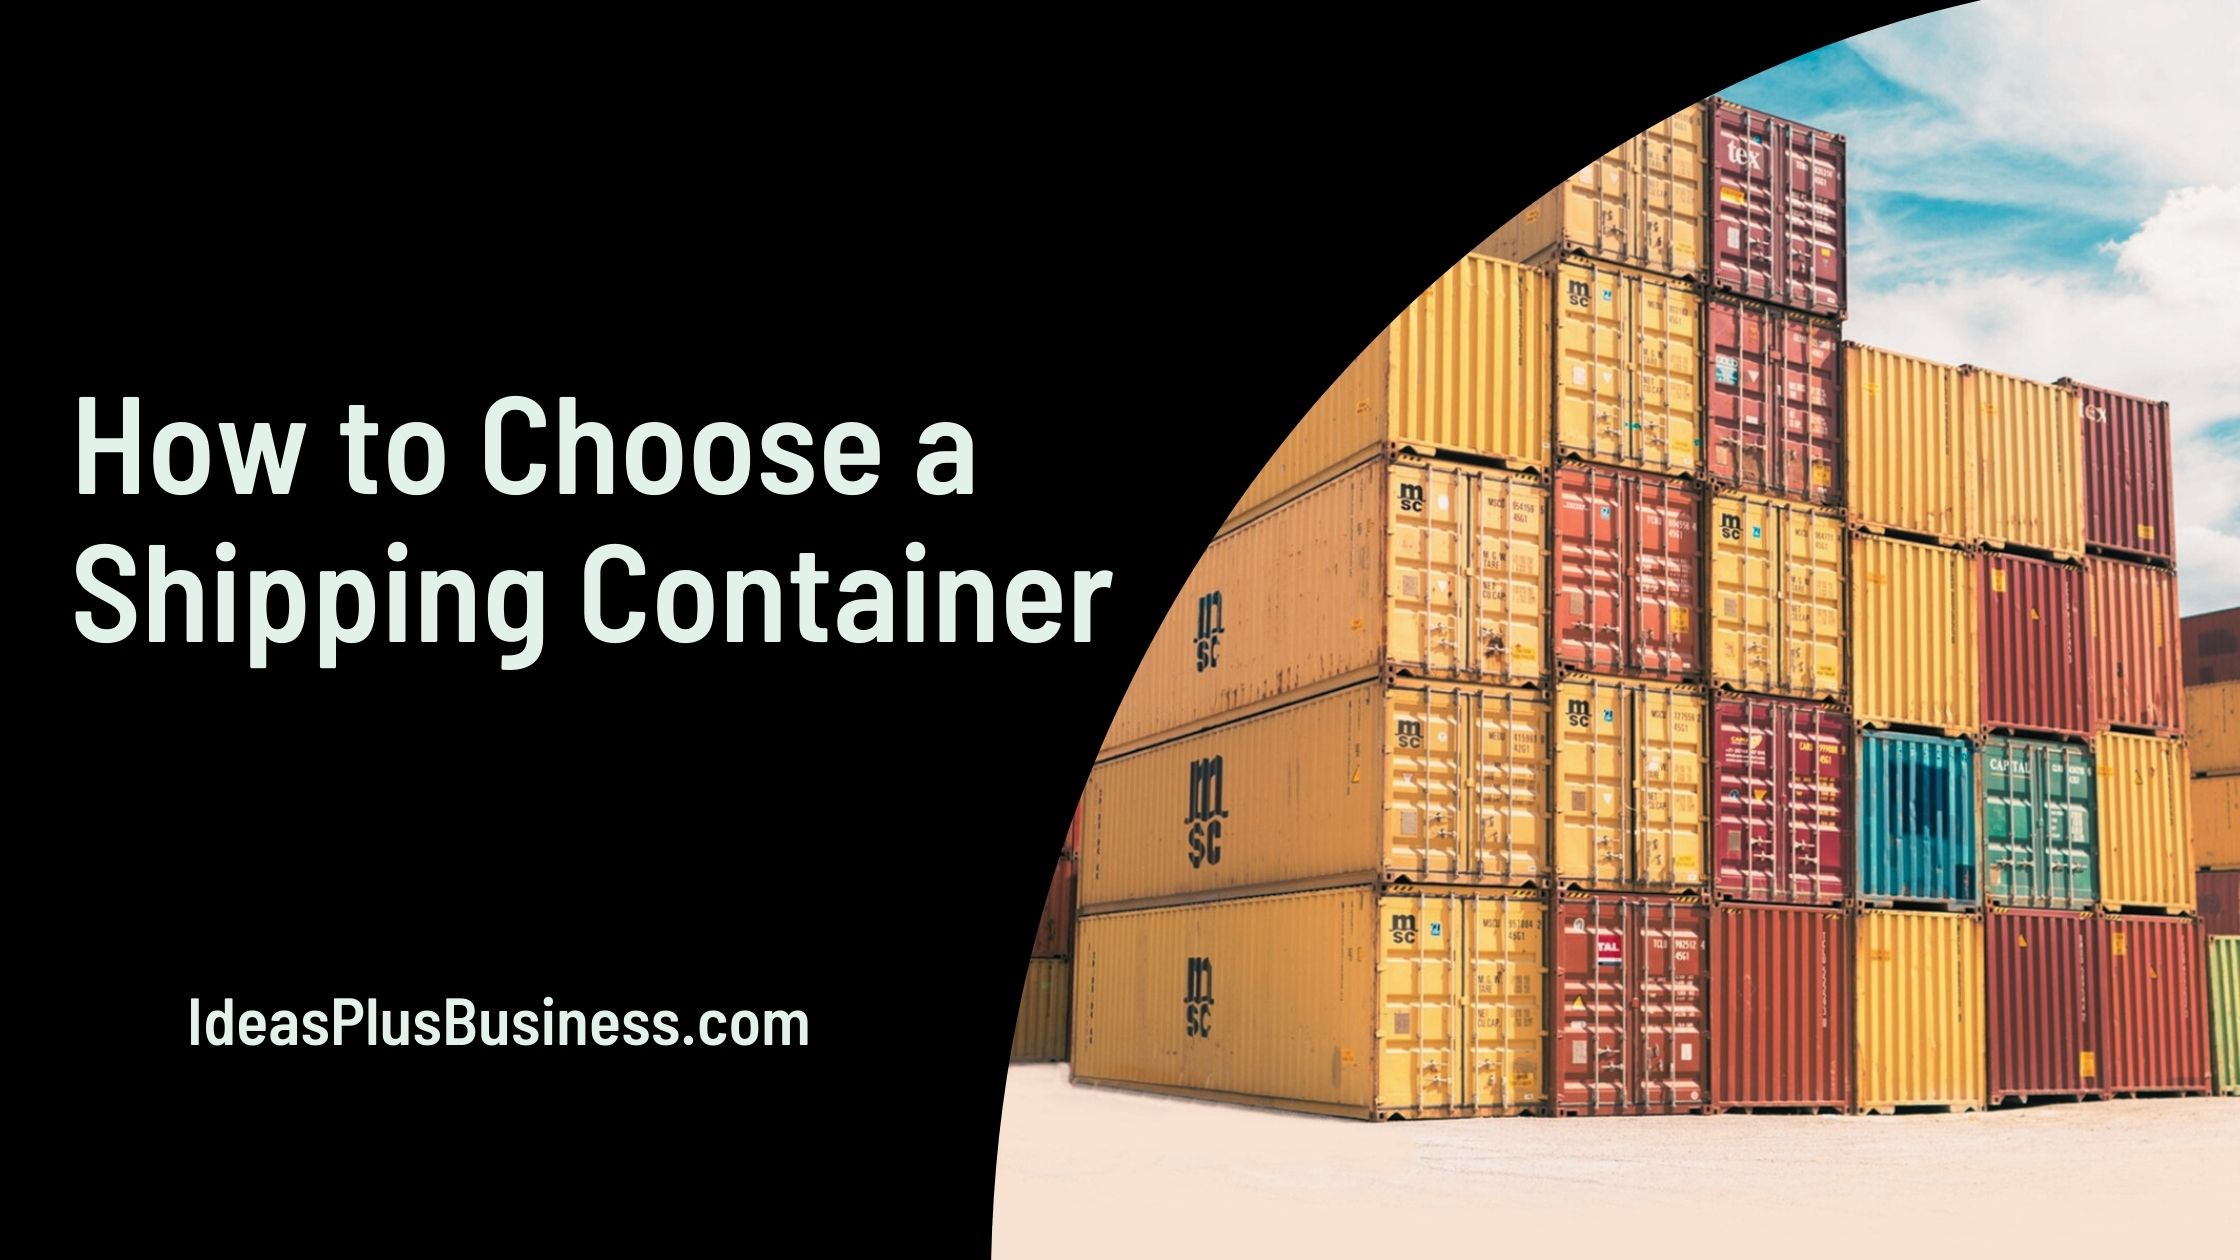 How to Choose a Shipping Container